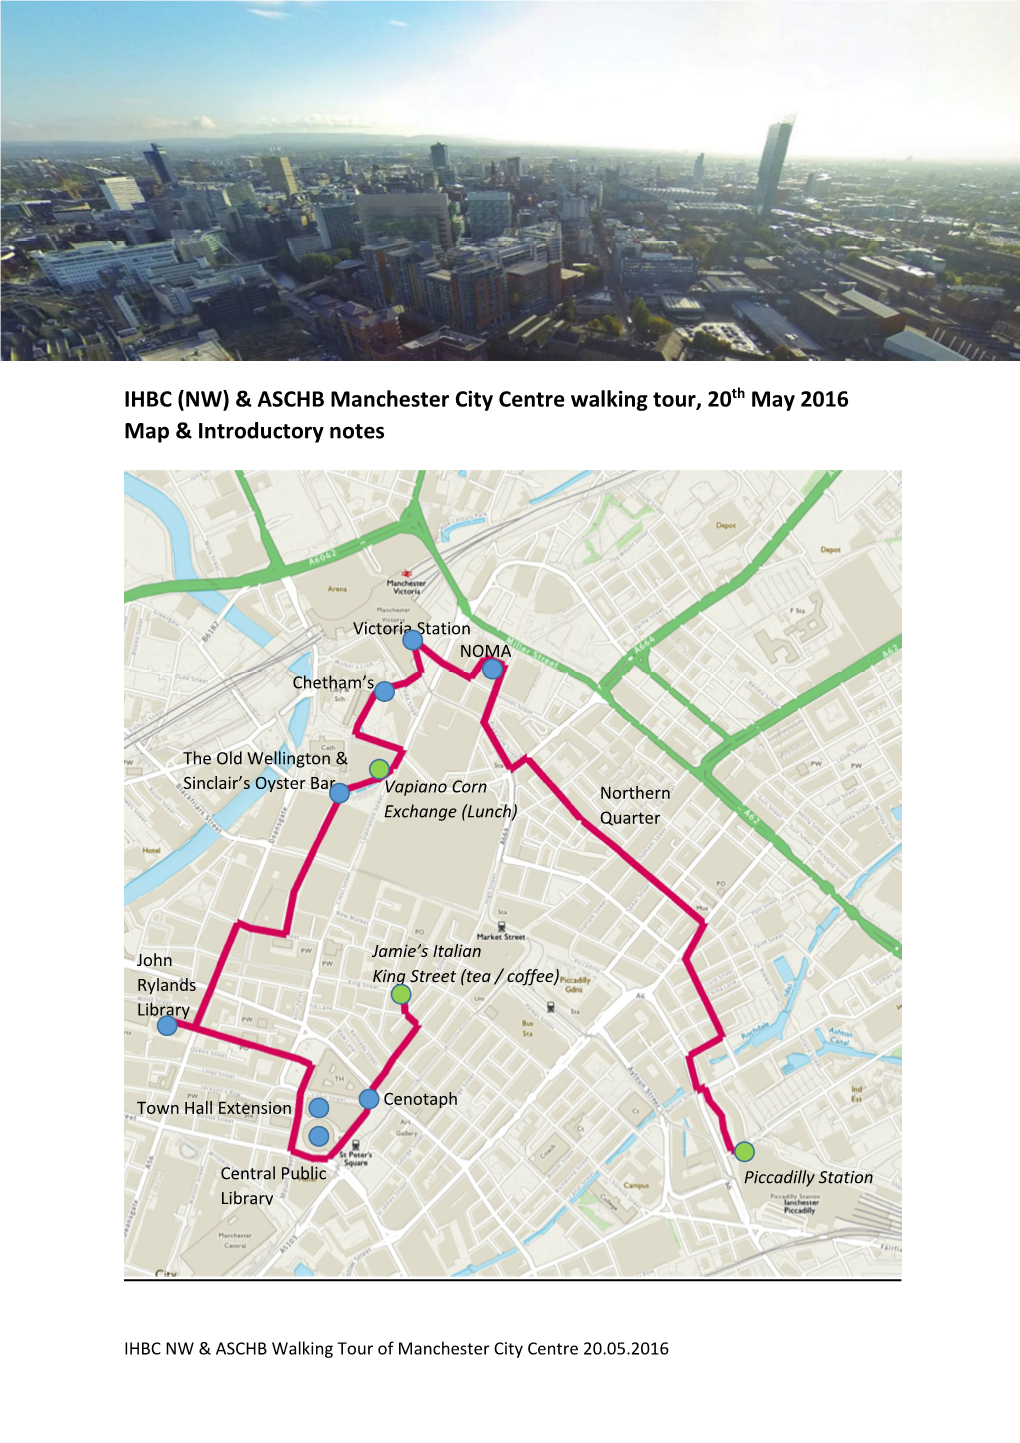 IHBC (NW) & ASCHB Manchester City Centre Walking Tour, 20Th May 2016 Map & Introductory Notes